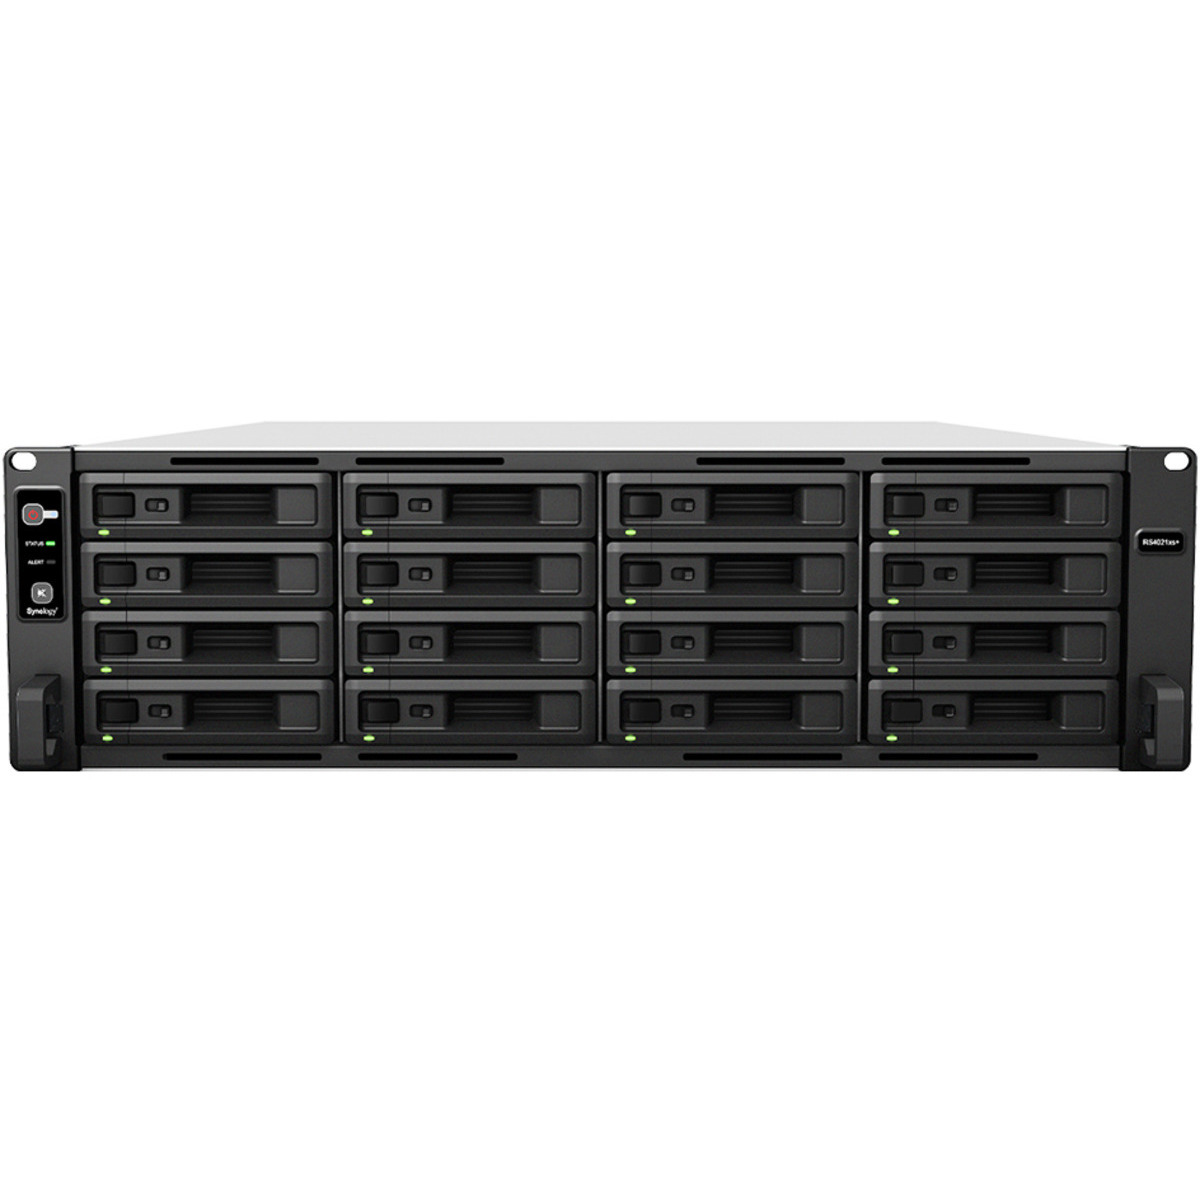 buy $21429 Synology RackStation RS4021xs+ 128tb RackMount NAS - Network Attached Storage Device 16x8000gb Samsung 870 QVO MZ-77Q8T0 2.5 SATA 6Gb/s SSD CONSUMER Class Drives Installed - Burn-In Tested - nas headquarters buy network attached storage server device das new raid-5 free shipping usa christmas new year holiday sale RackStation RS4021xs+